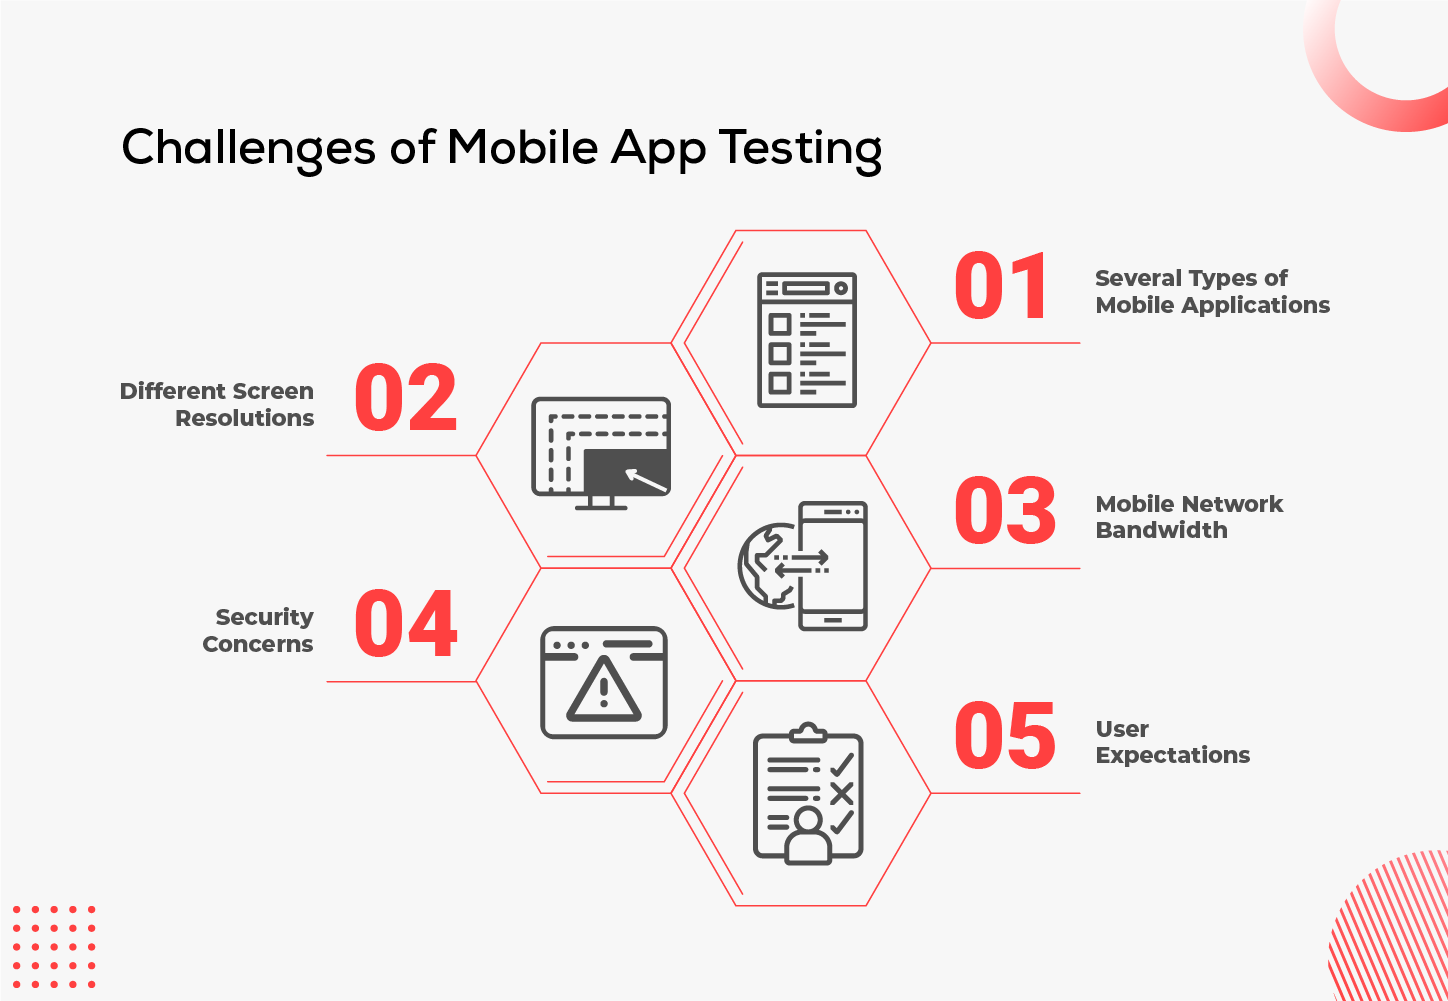 Challenges of Mobile App Testing